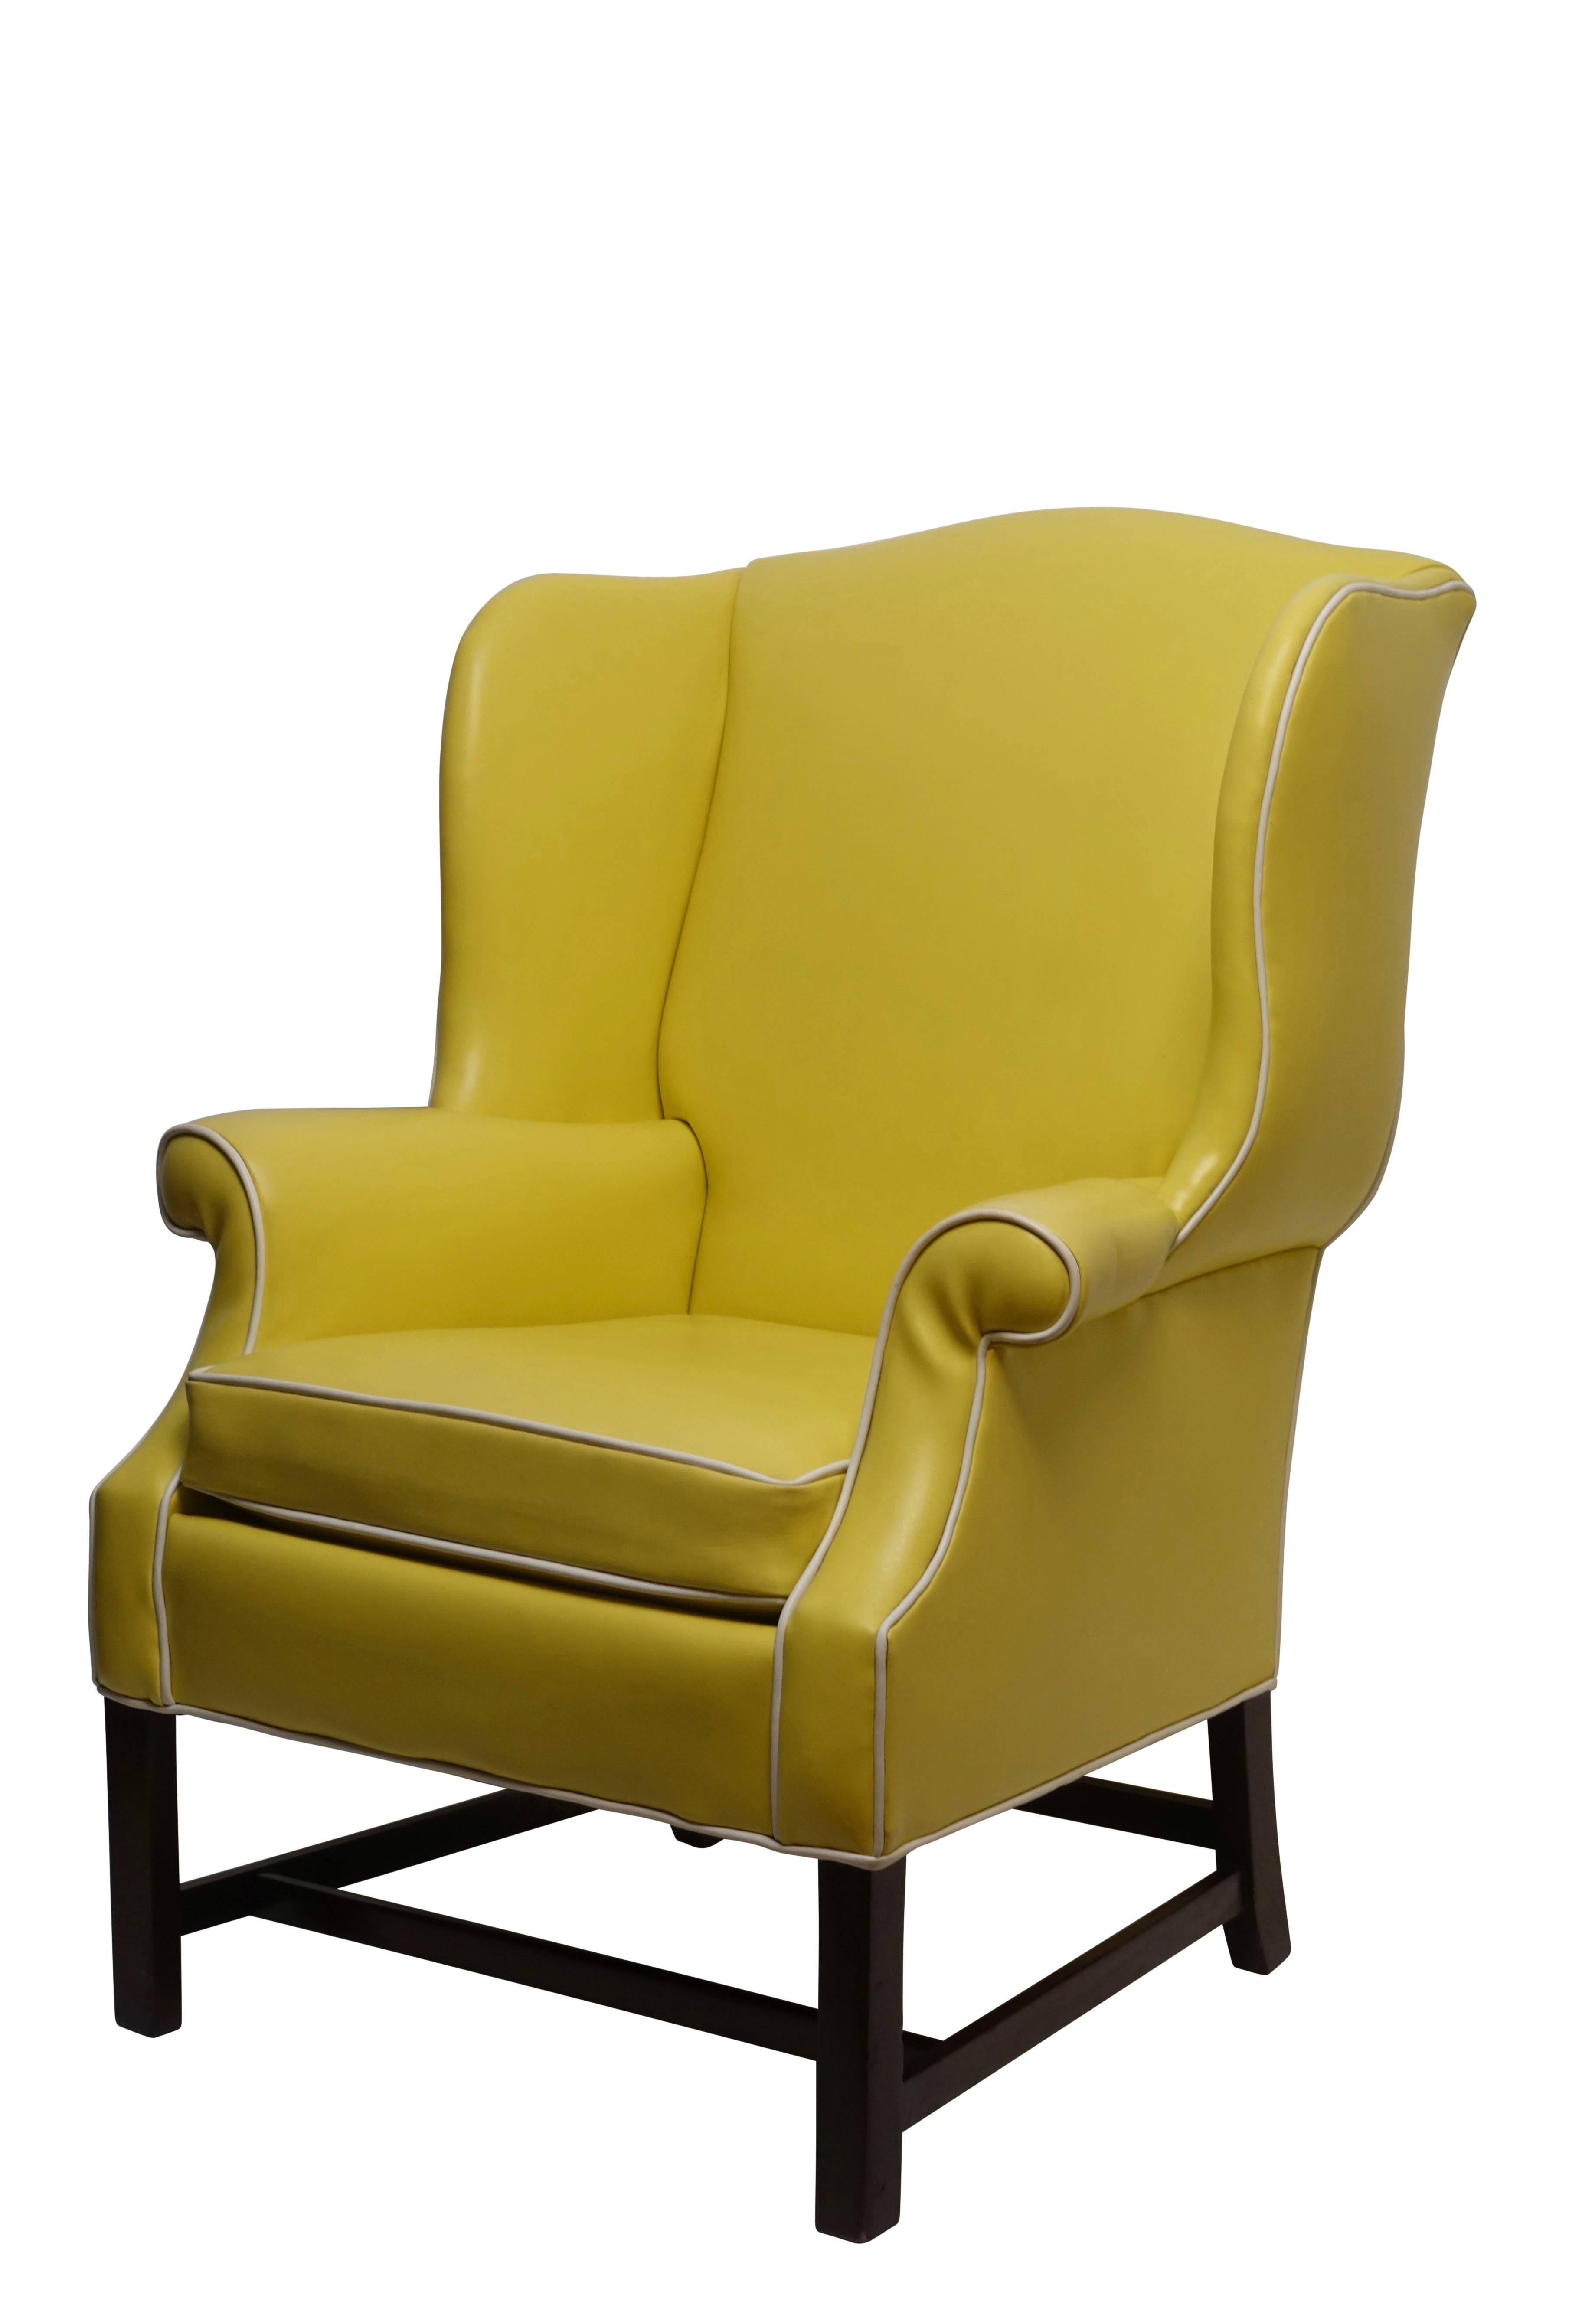 A pair of Georgian style yellow and white vinyl upholstered wingback chairs with white piping detail, mahogany legs and stretchers. Manufactured by Breuners for a design client, circa 1960s. Measures: Height-42